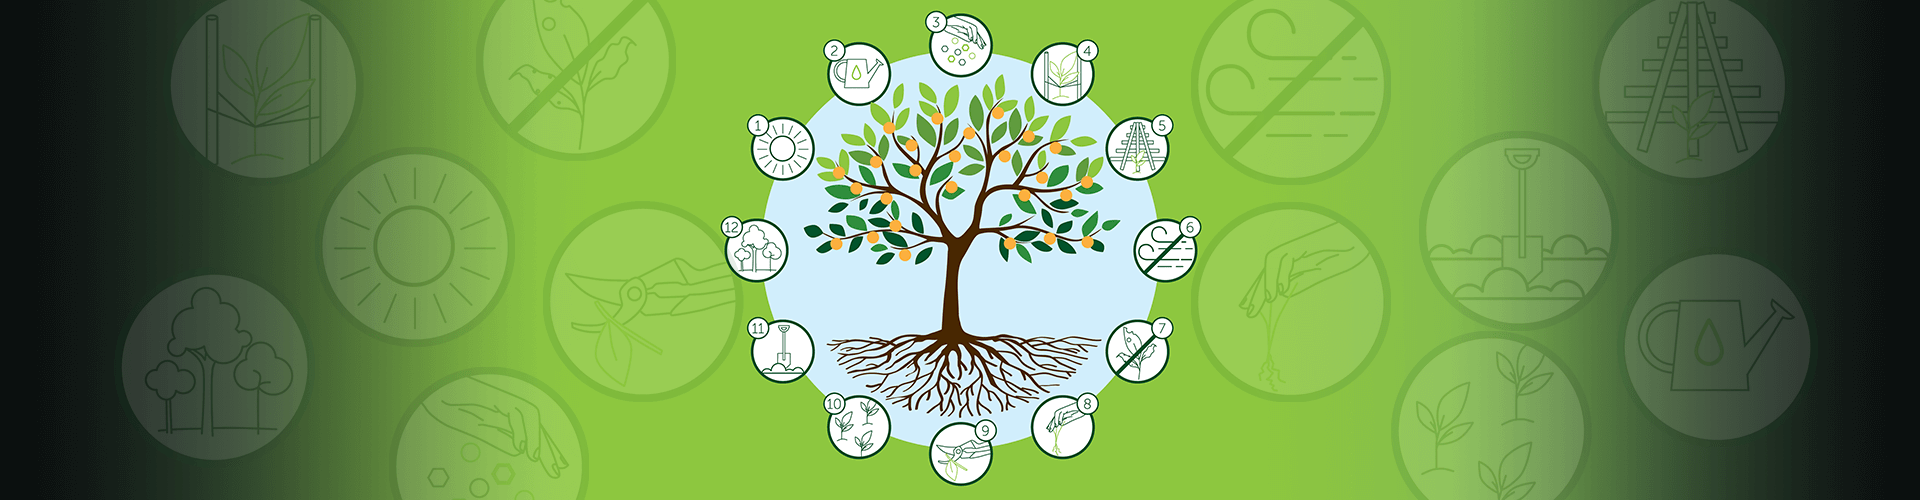 Fruit tree with oranges and white circles of gardening illustrations surrounding it on green background